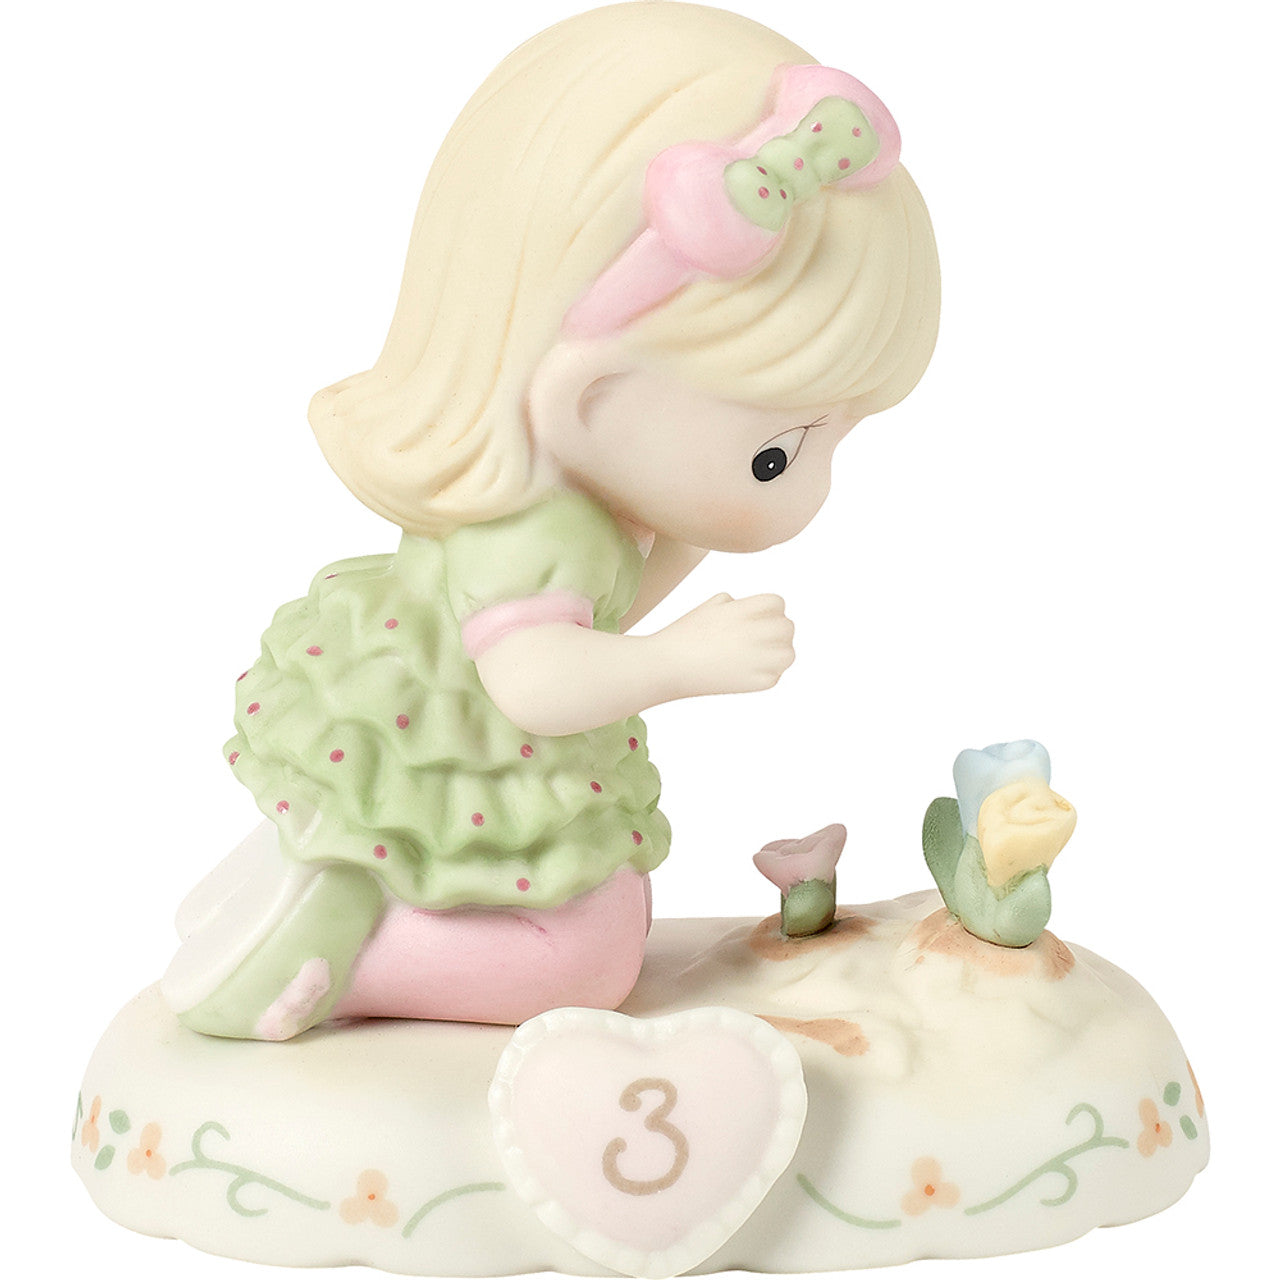 age 3 figurine front